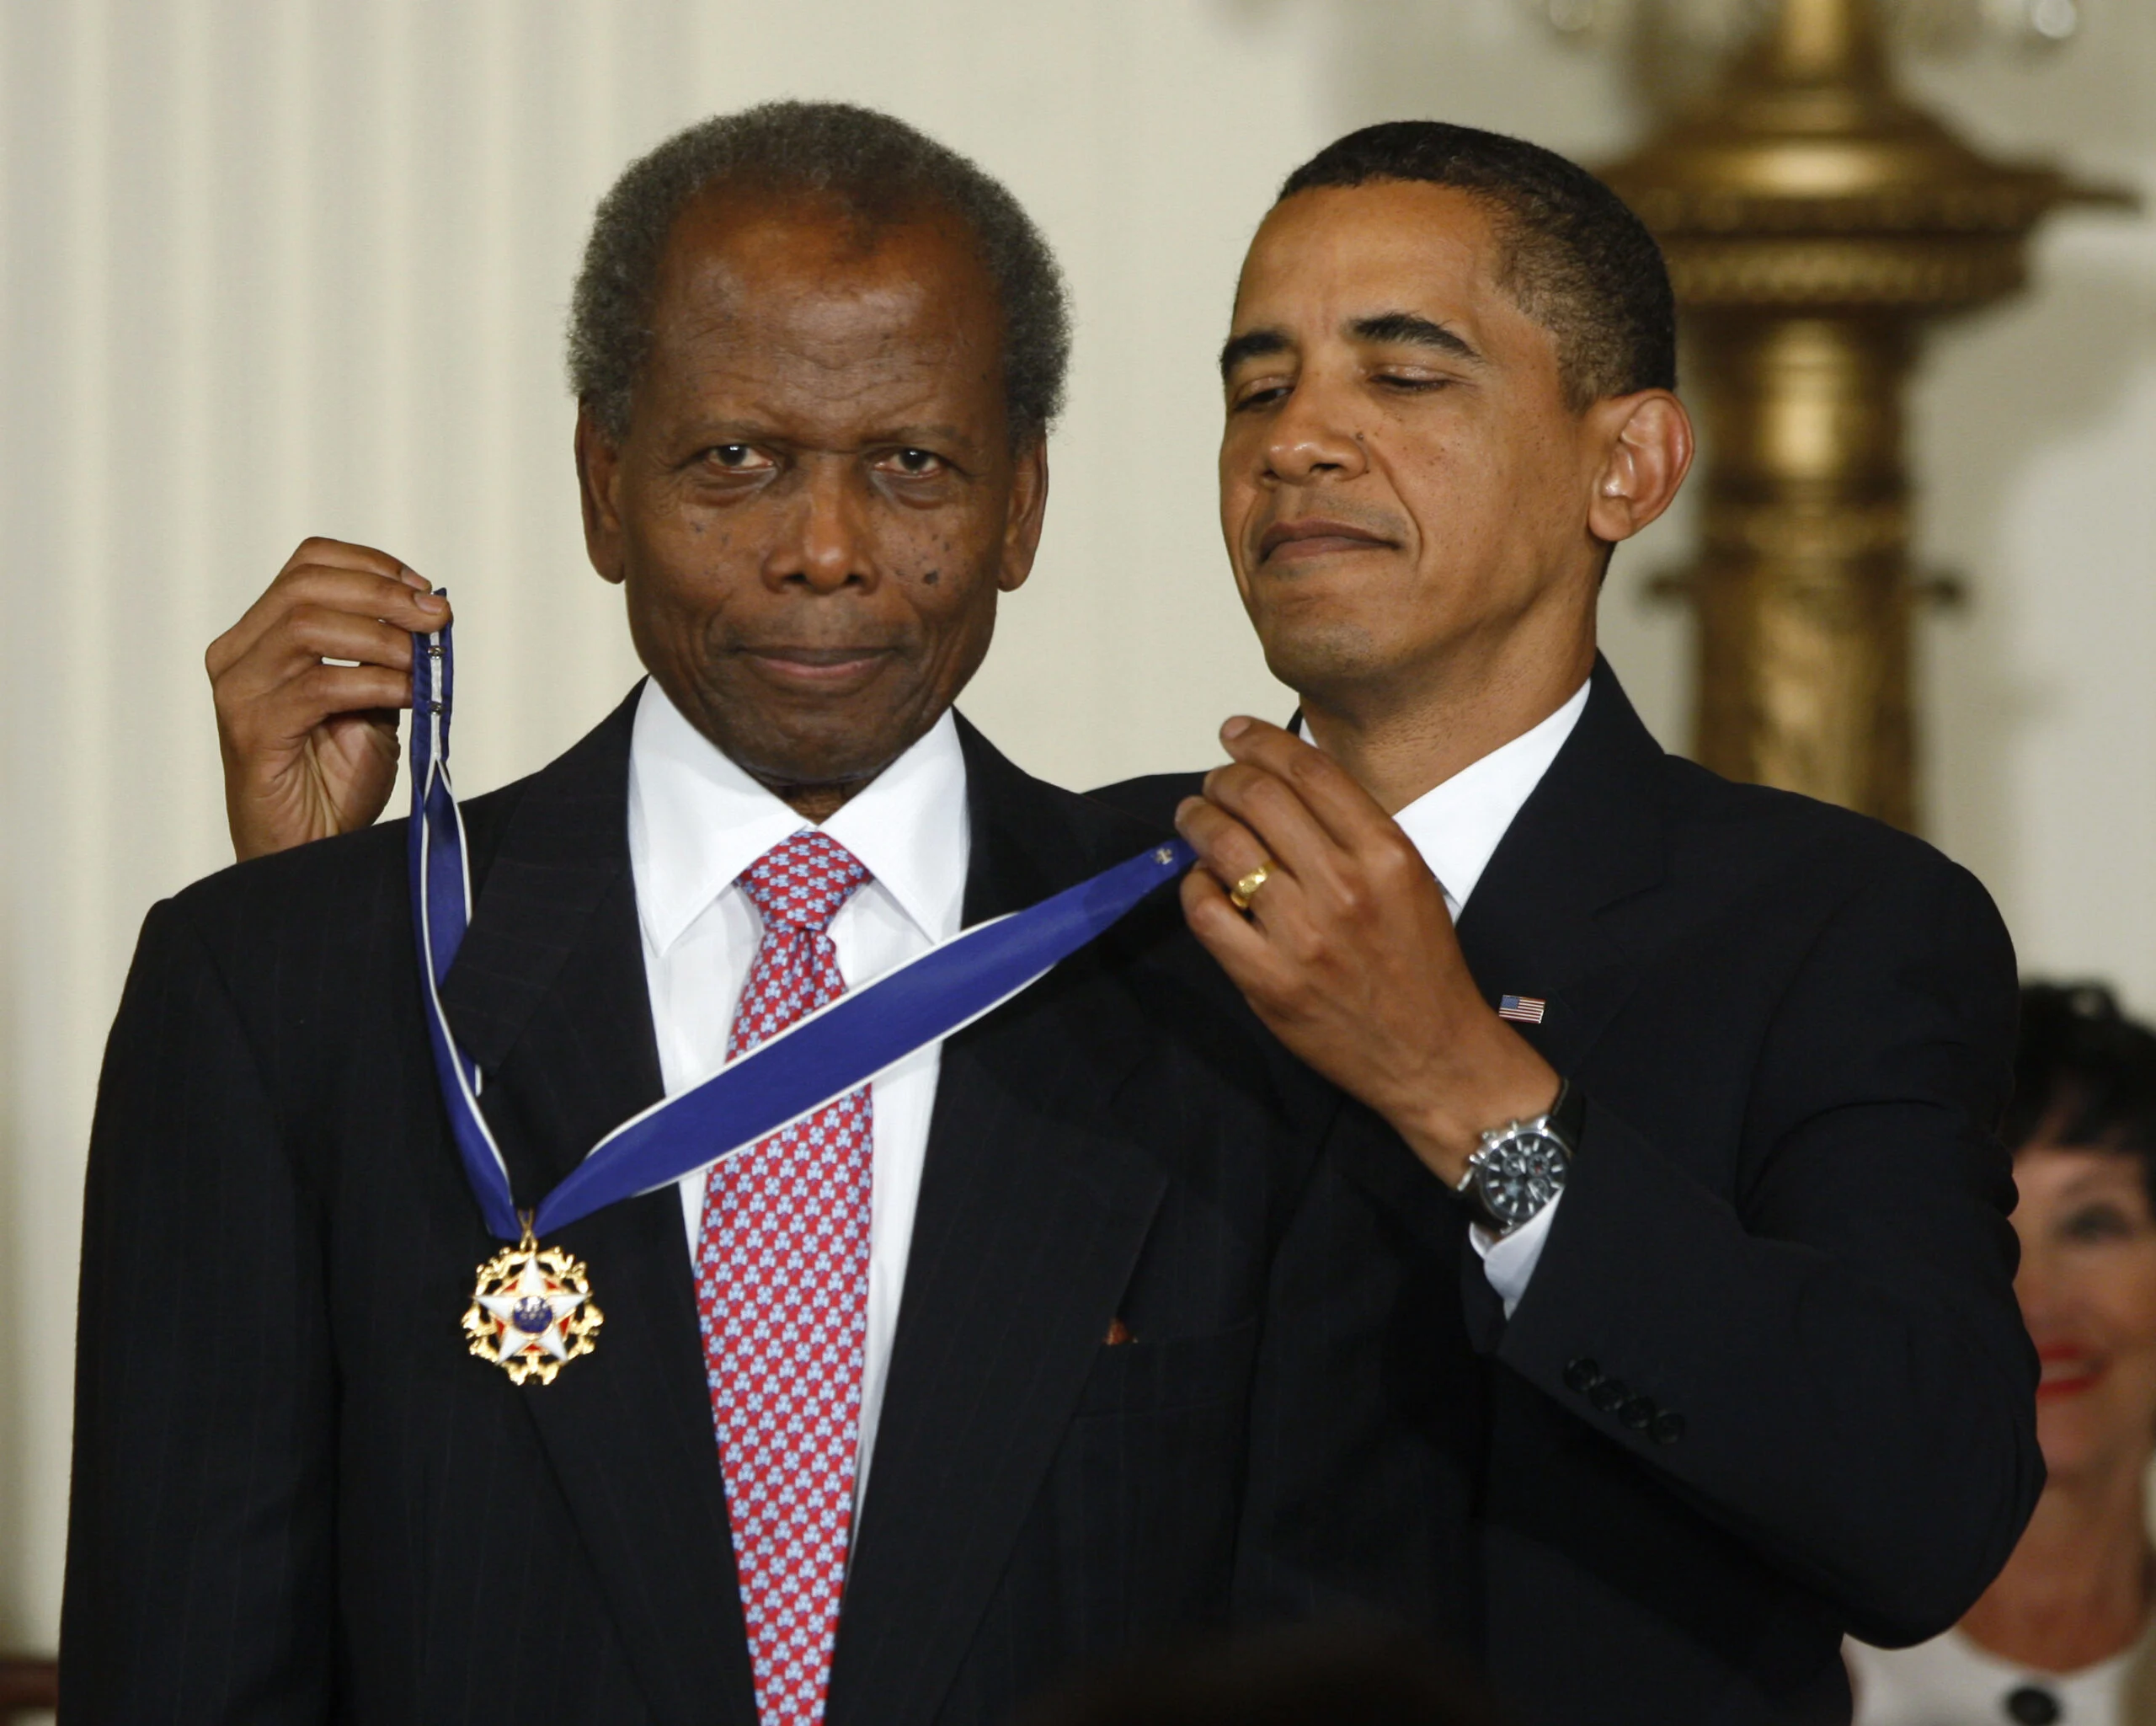 Us President Obama Presents Medal Of Freedom To Veteran Actor Poitier During A Ceremony In Washington